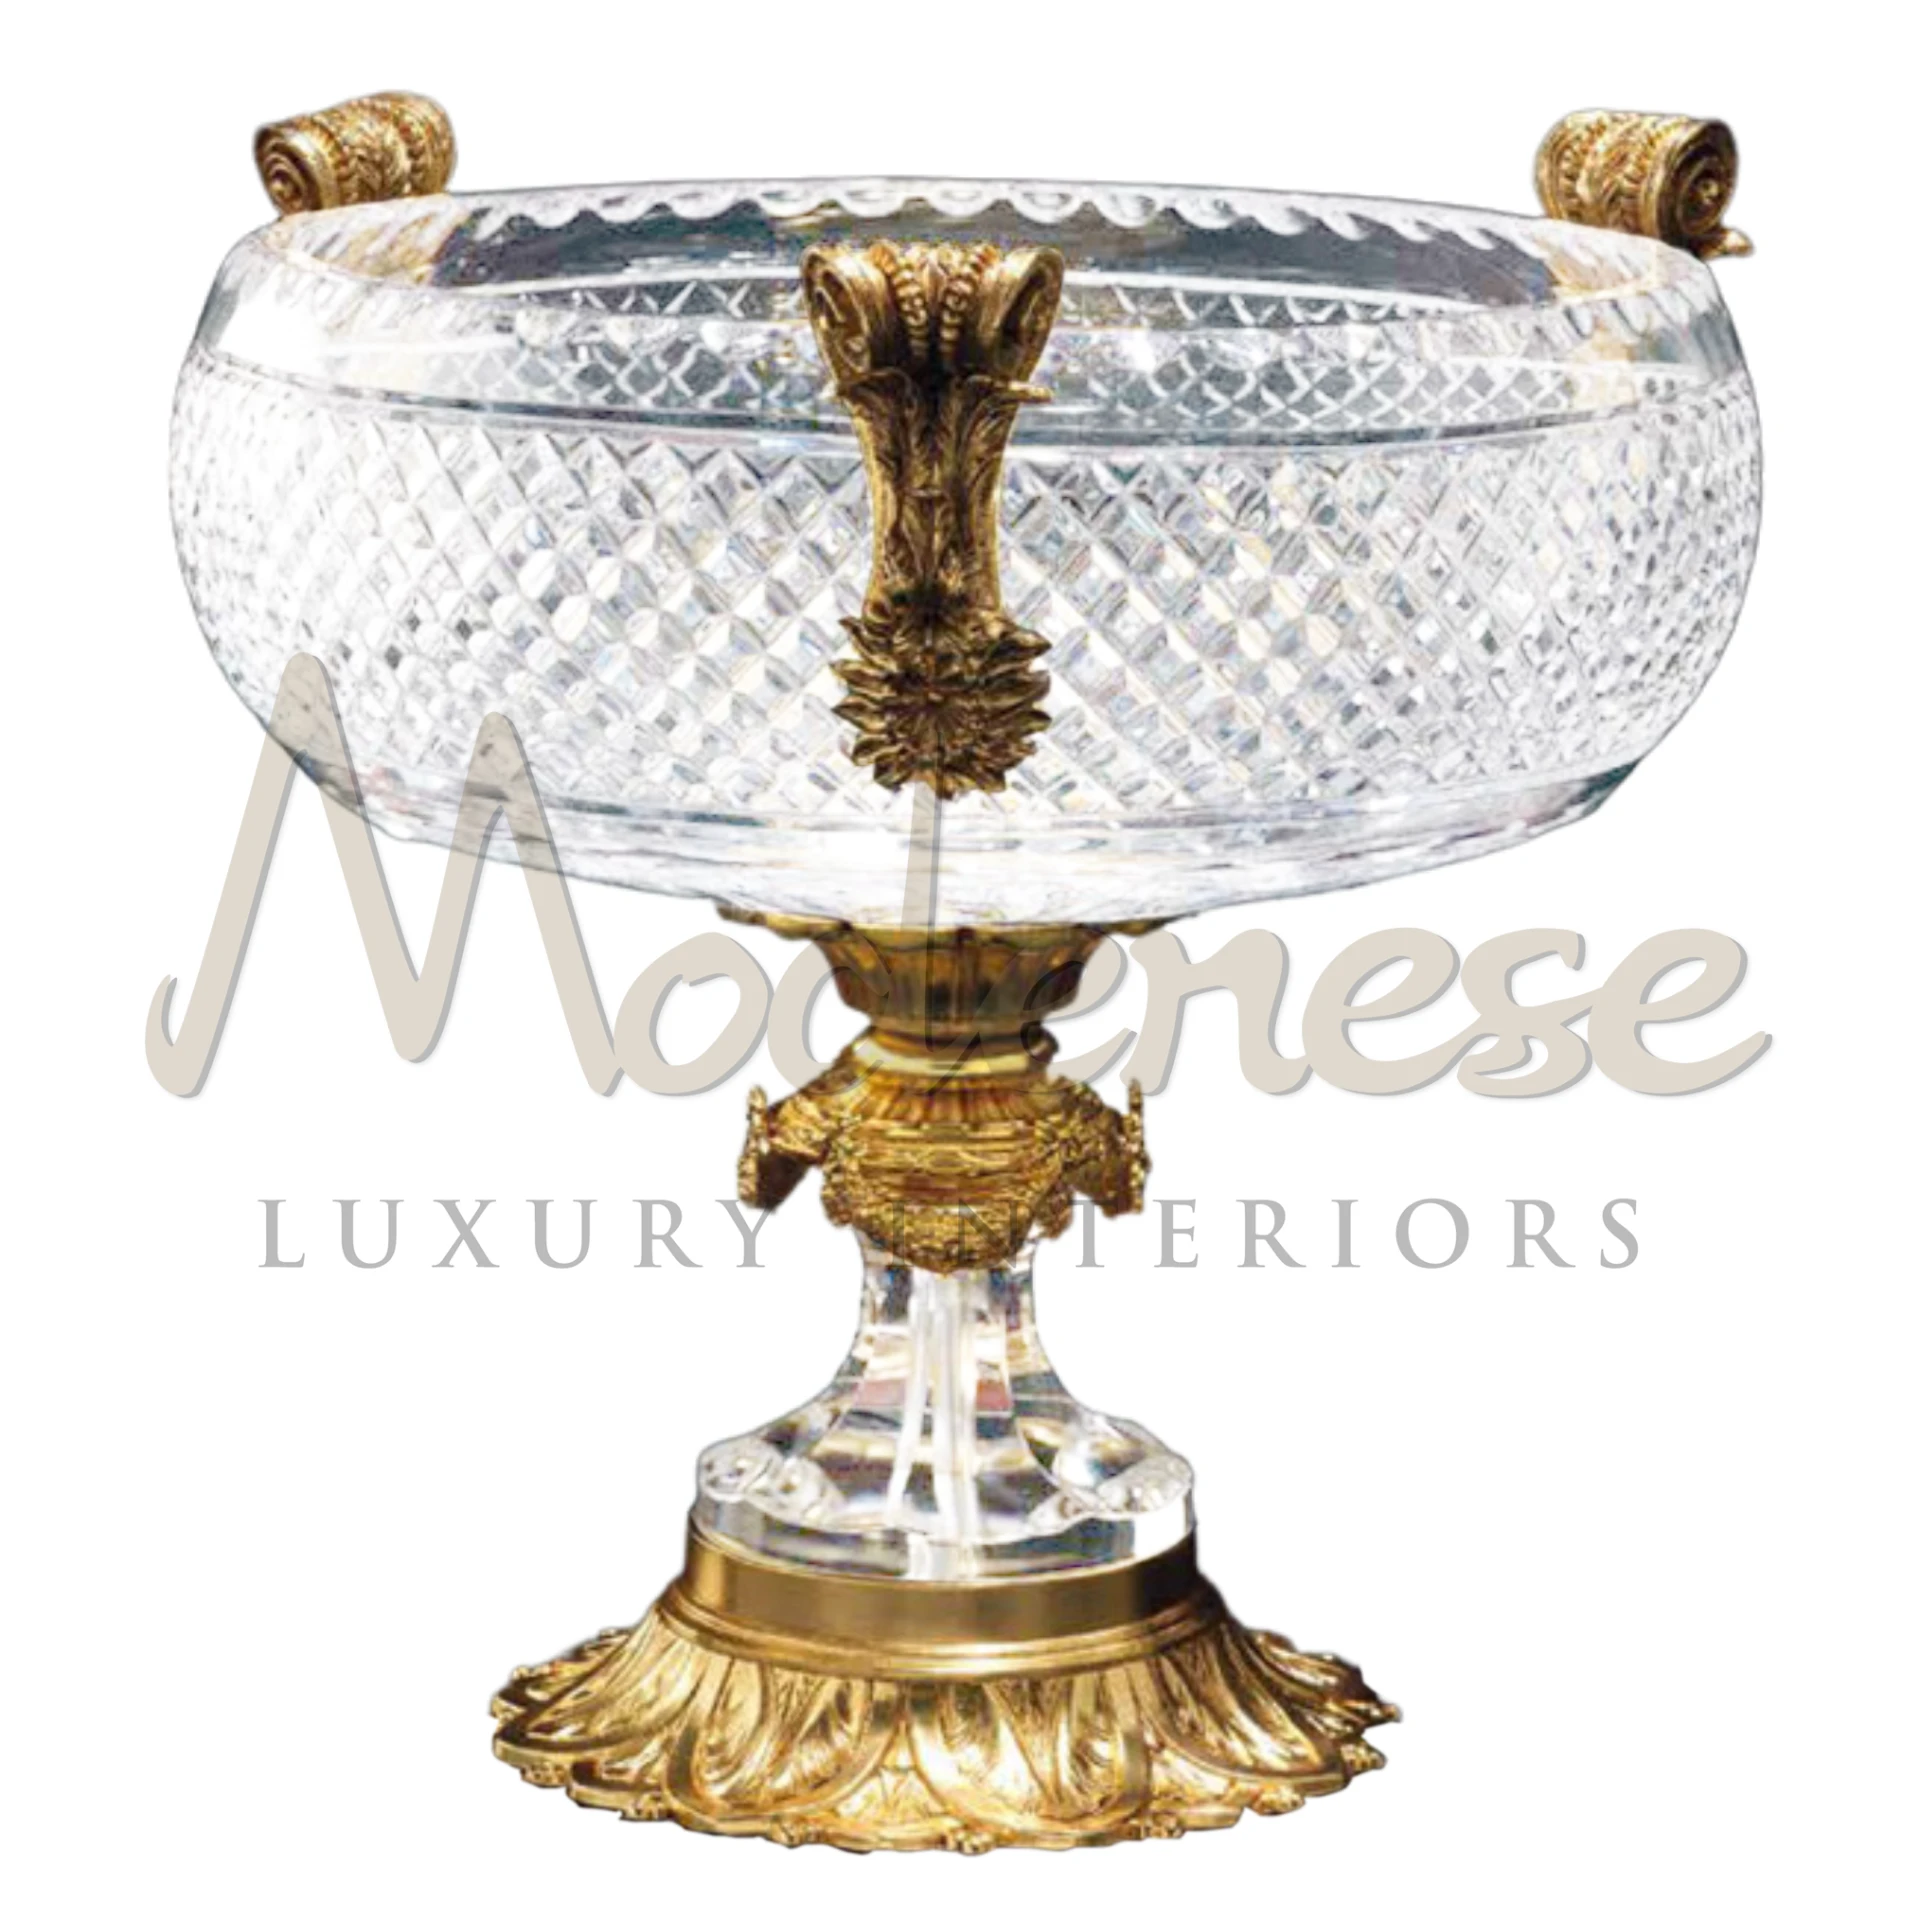 Imperial Crystal Pedestal Bowl, a symbol of luxury and elegance with high-quality crystal and intricate detailing, perfect for upscale deco